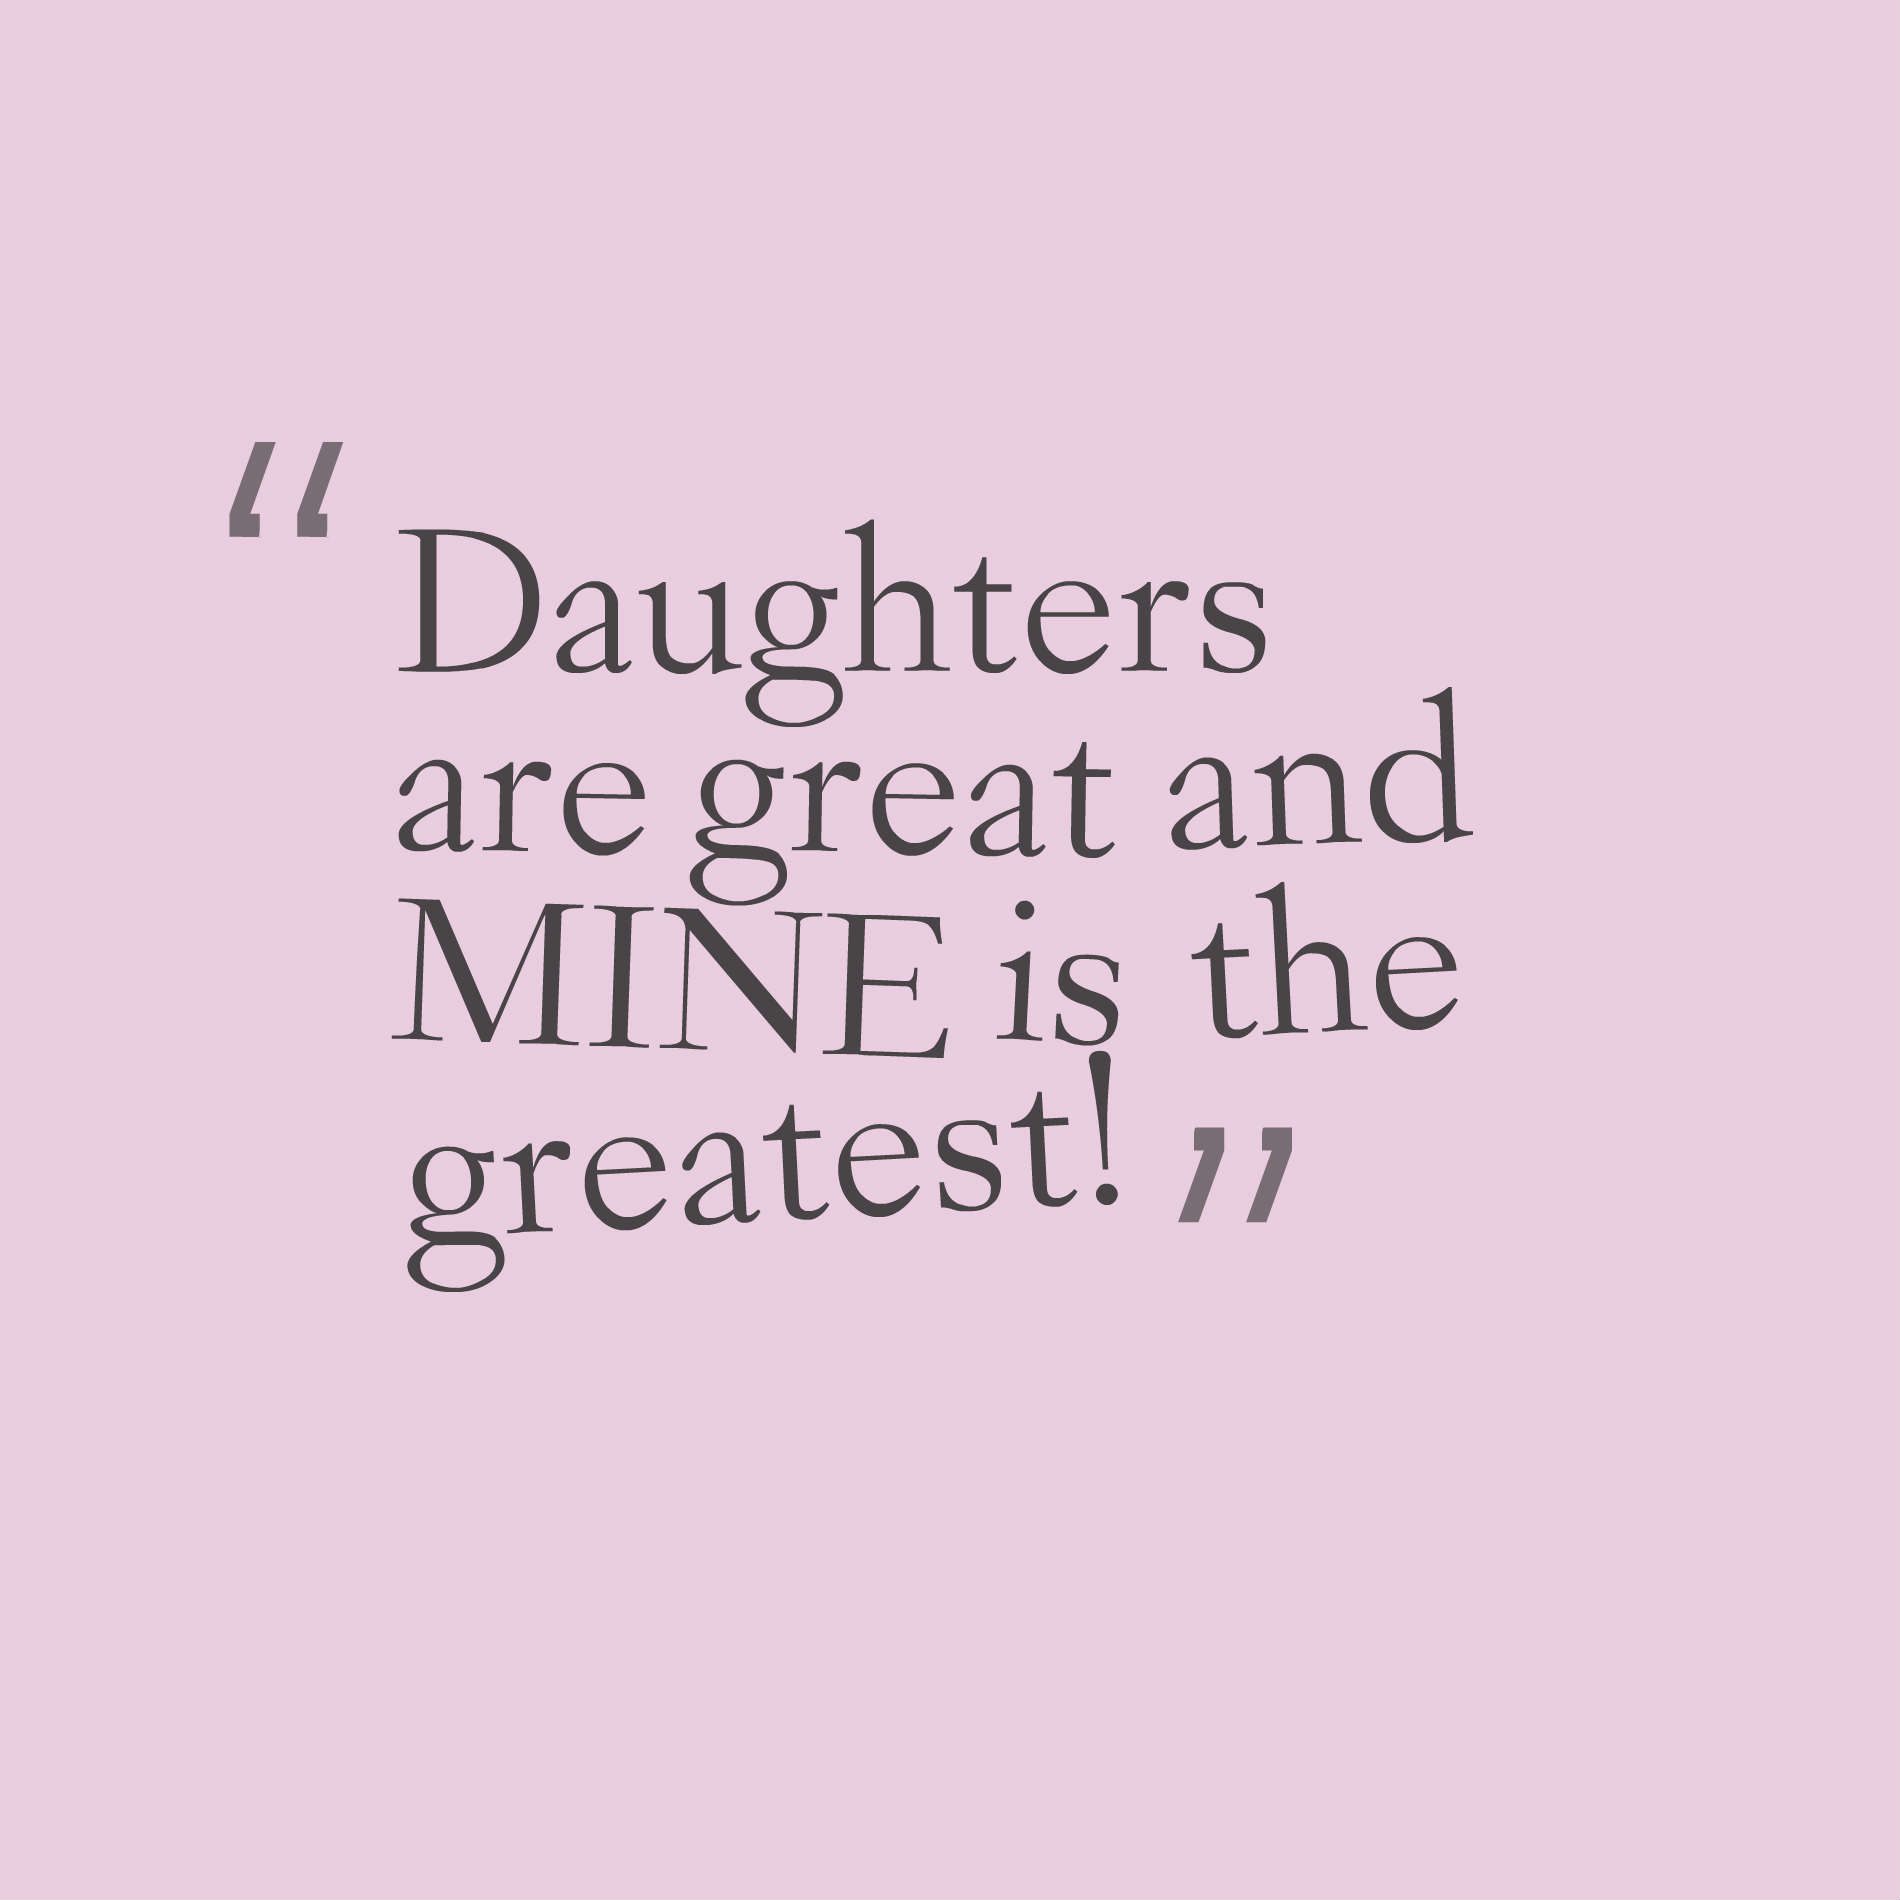 Daughters are great and MINE is the greatest!